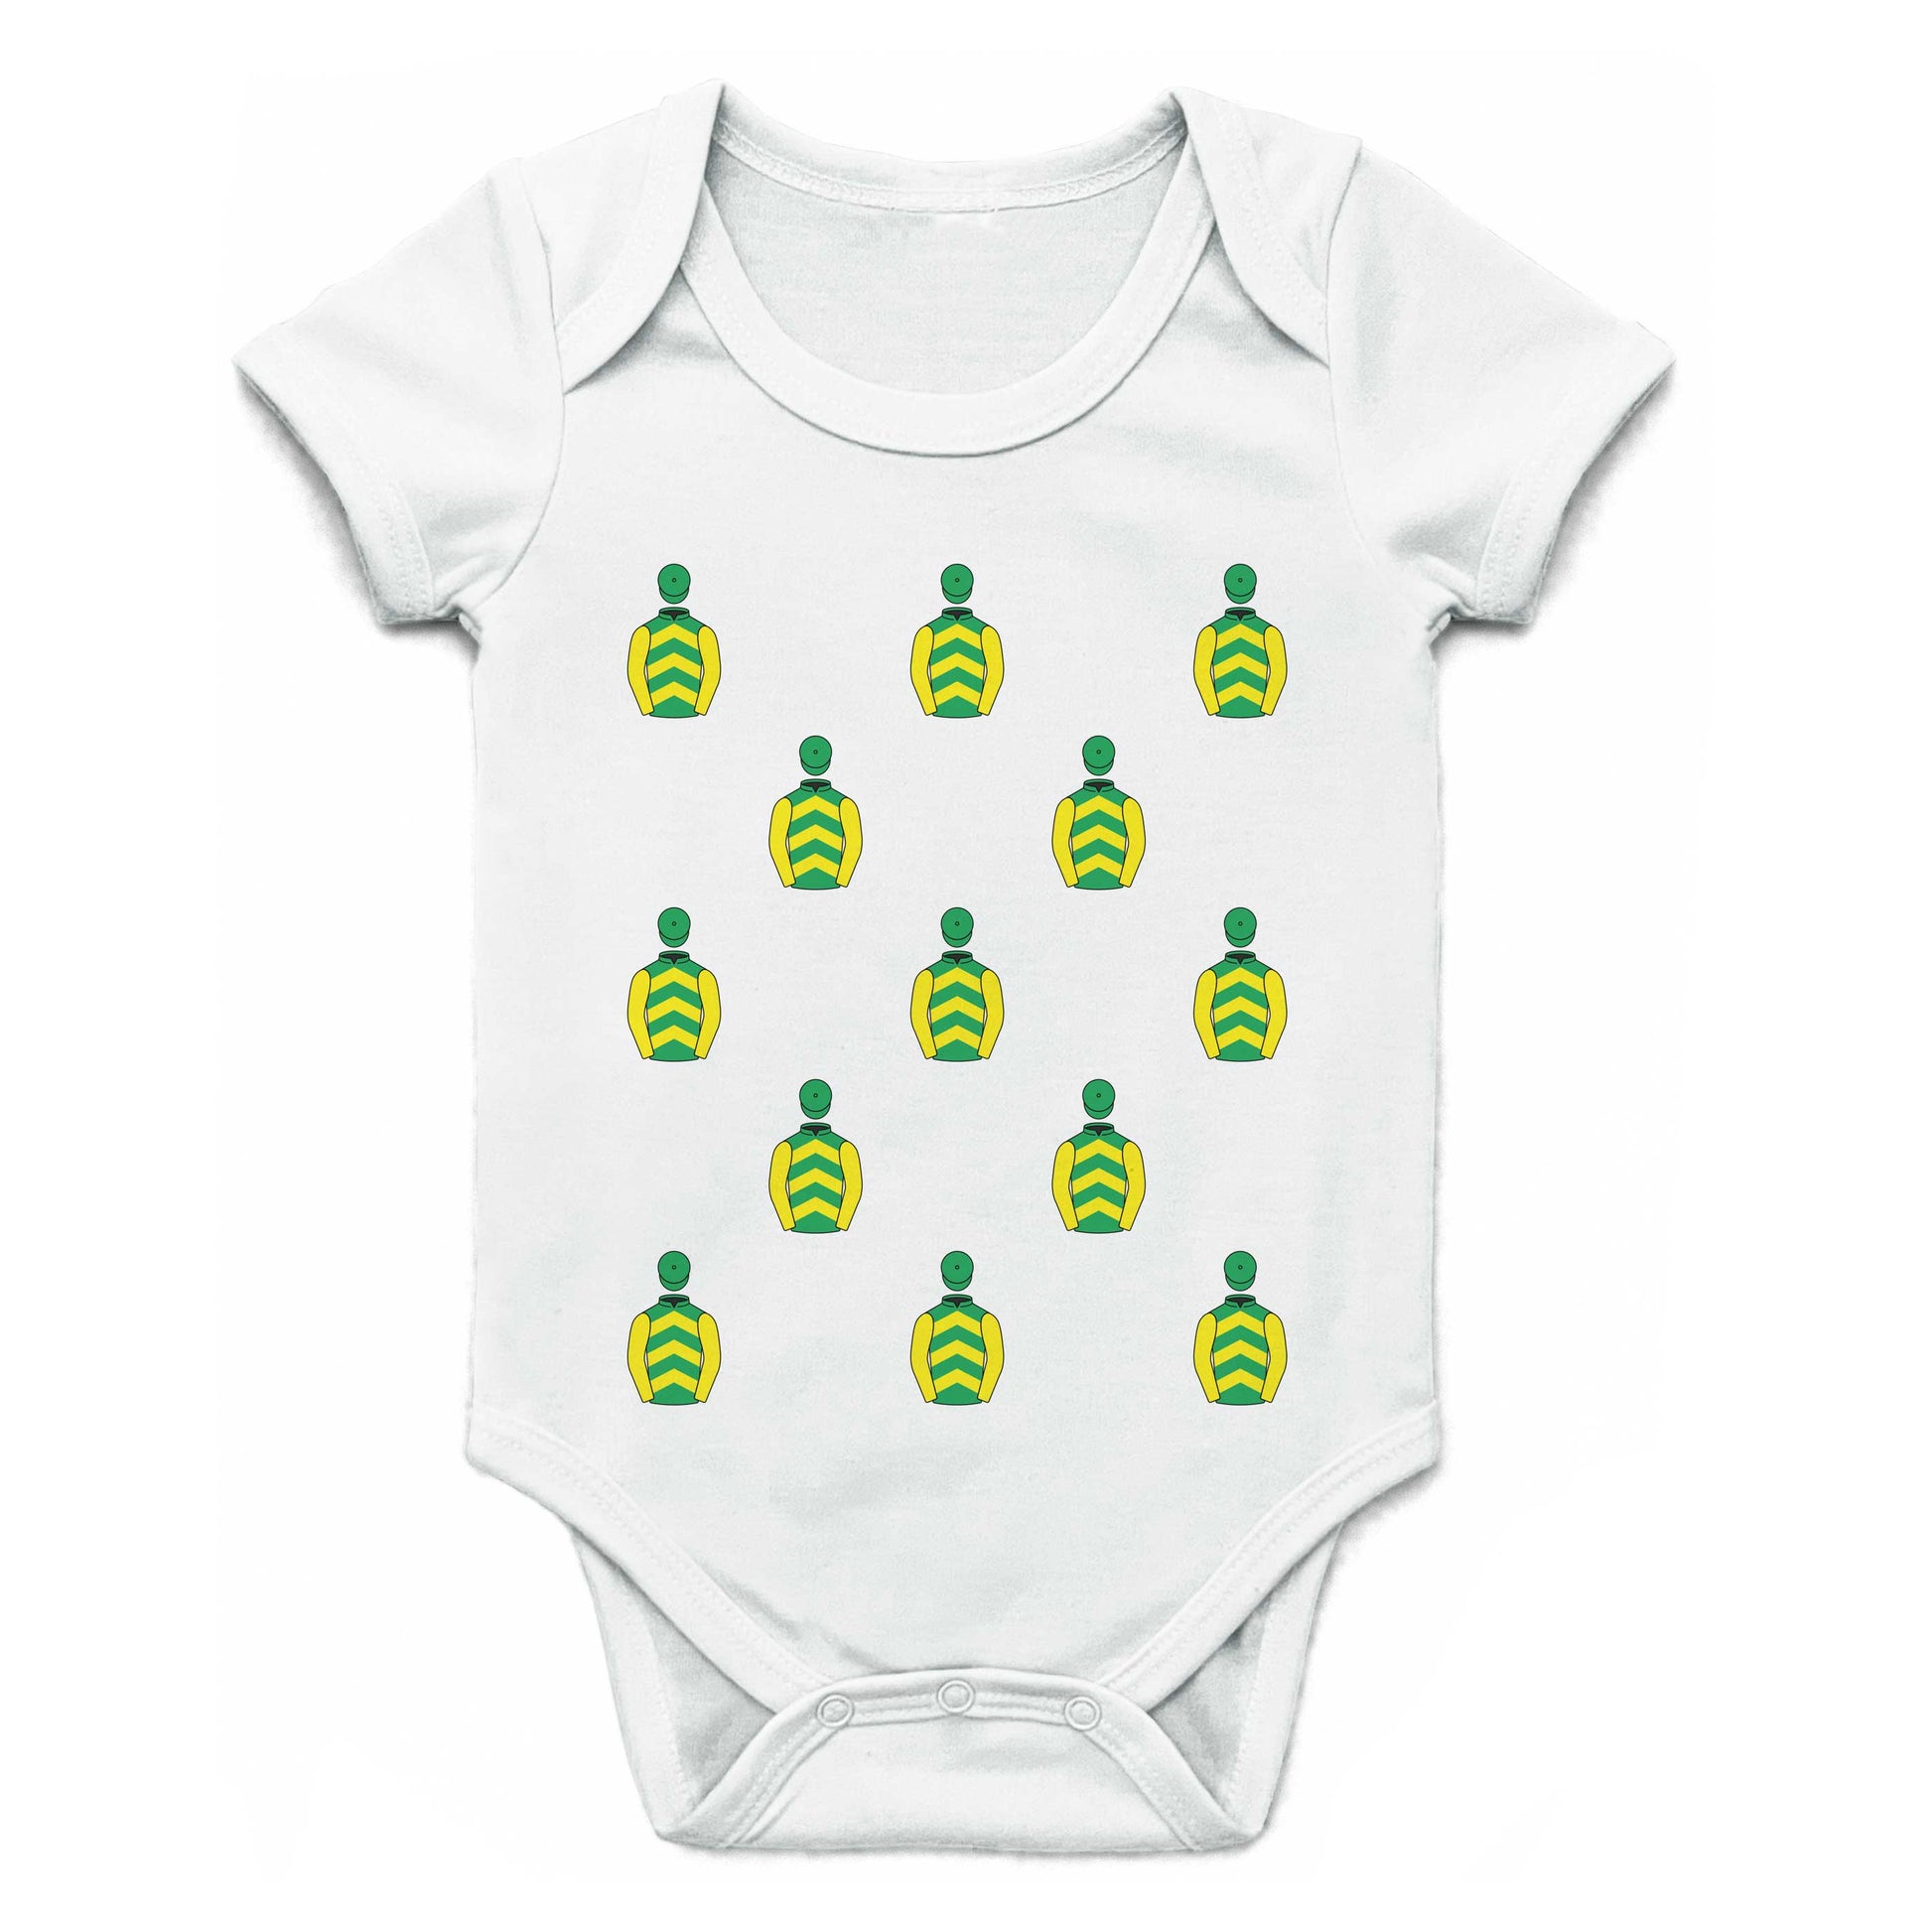 Watch This Space Syndicate Multiple Silks Baby Grow - Baby Grow - Hacked Up